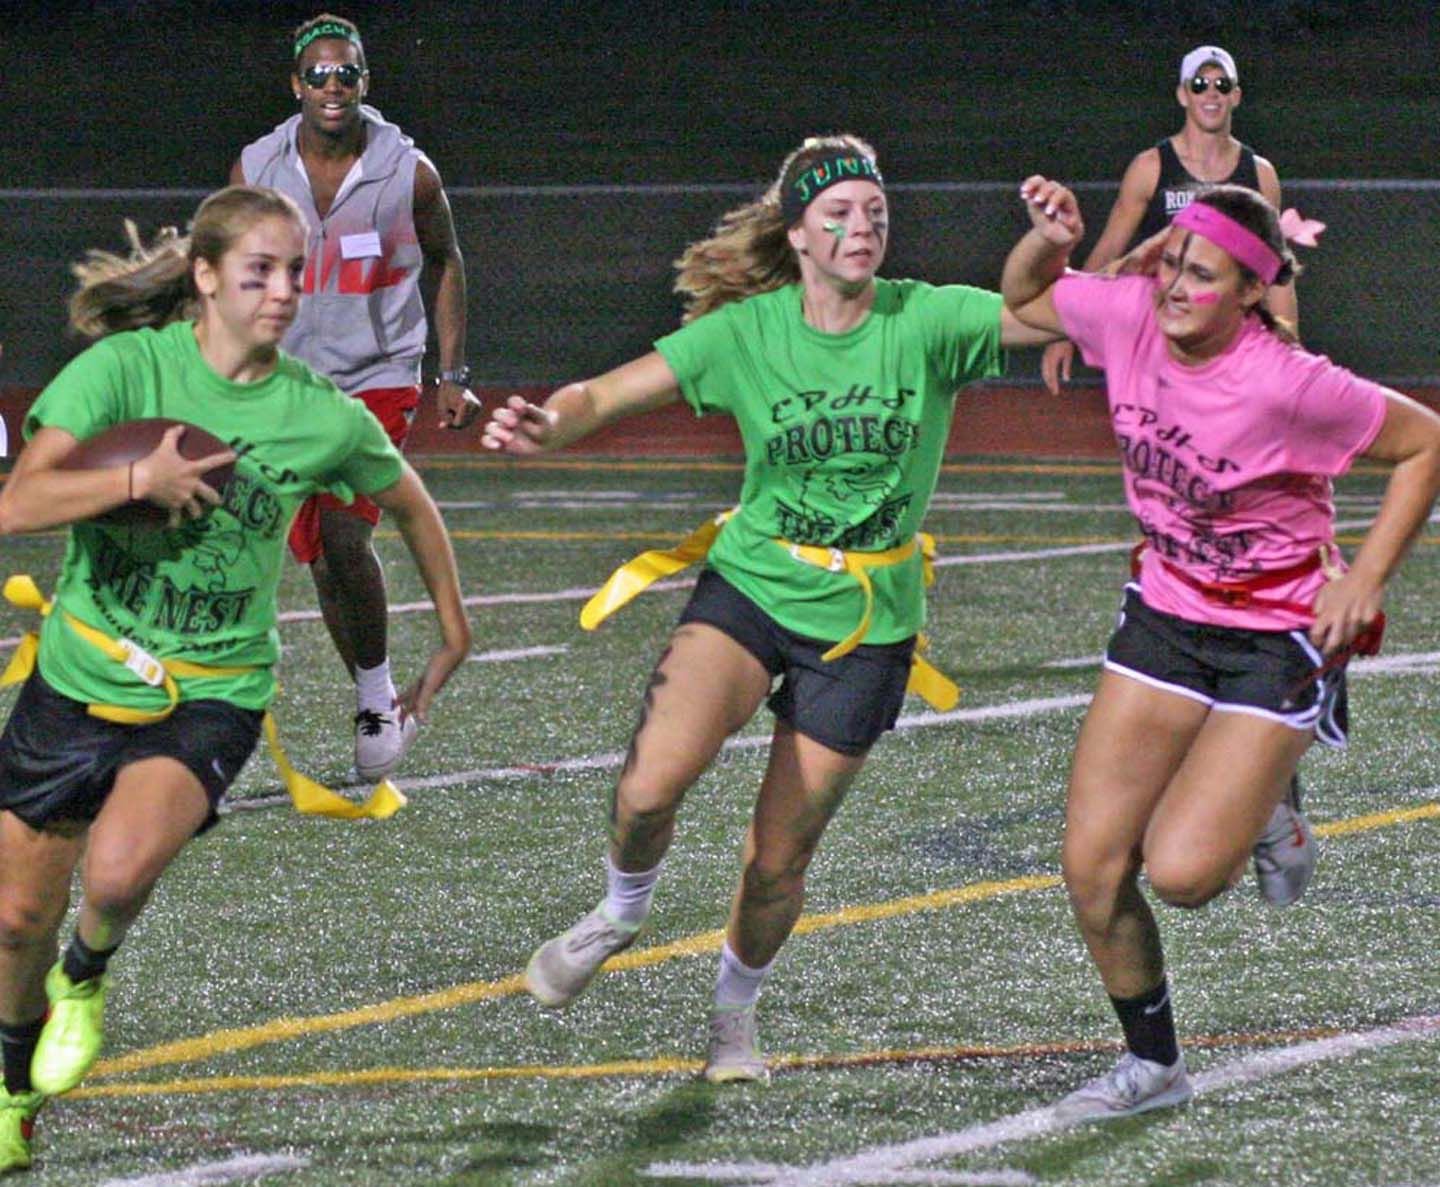 Powder Puff football event to tackle 